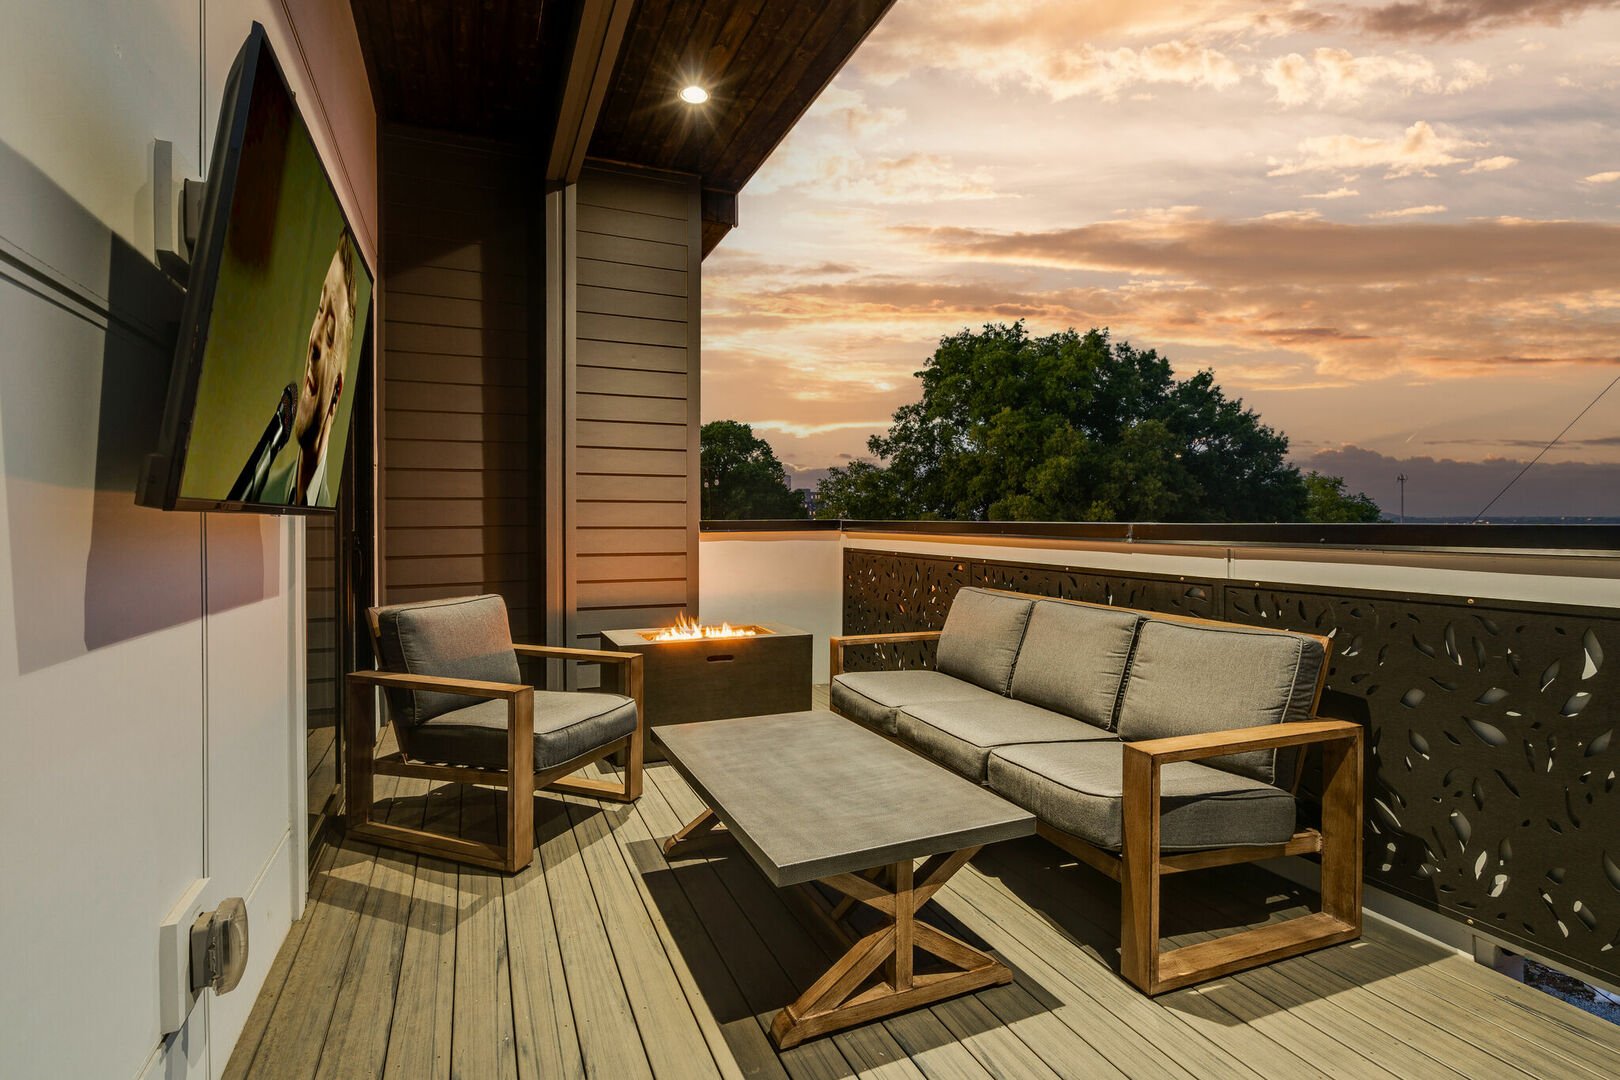 2nd Unit: Rooftop balcony with outdoor BBQ, smart TV, fire pit, and seating.